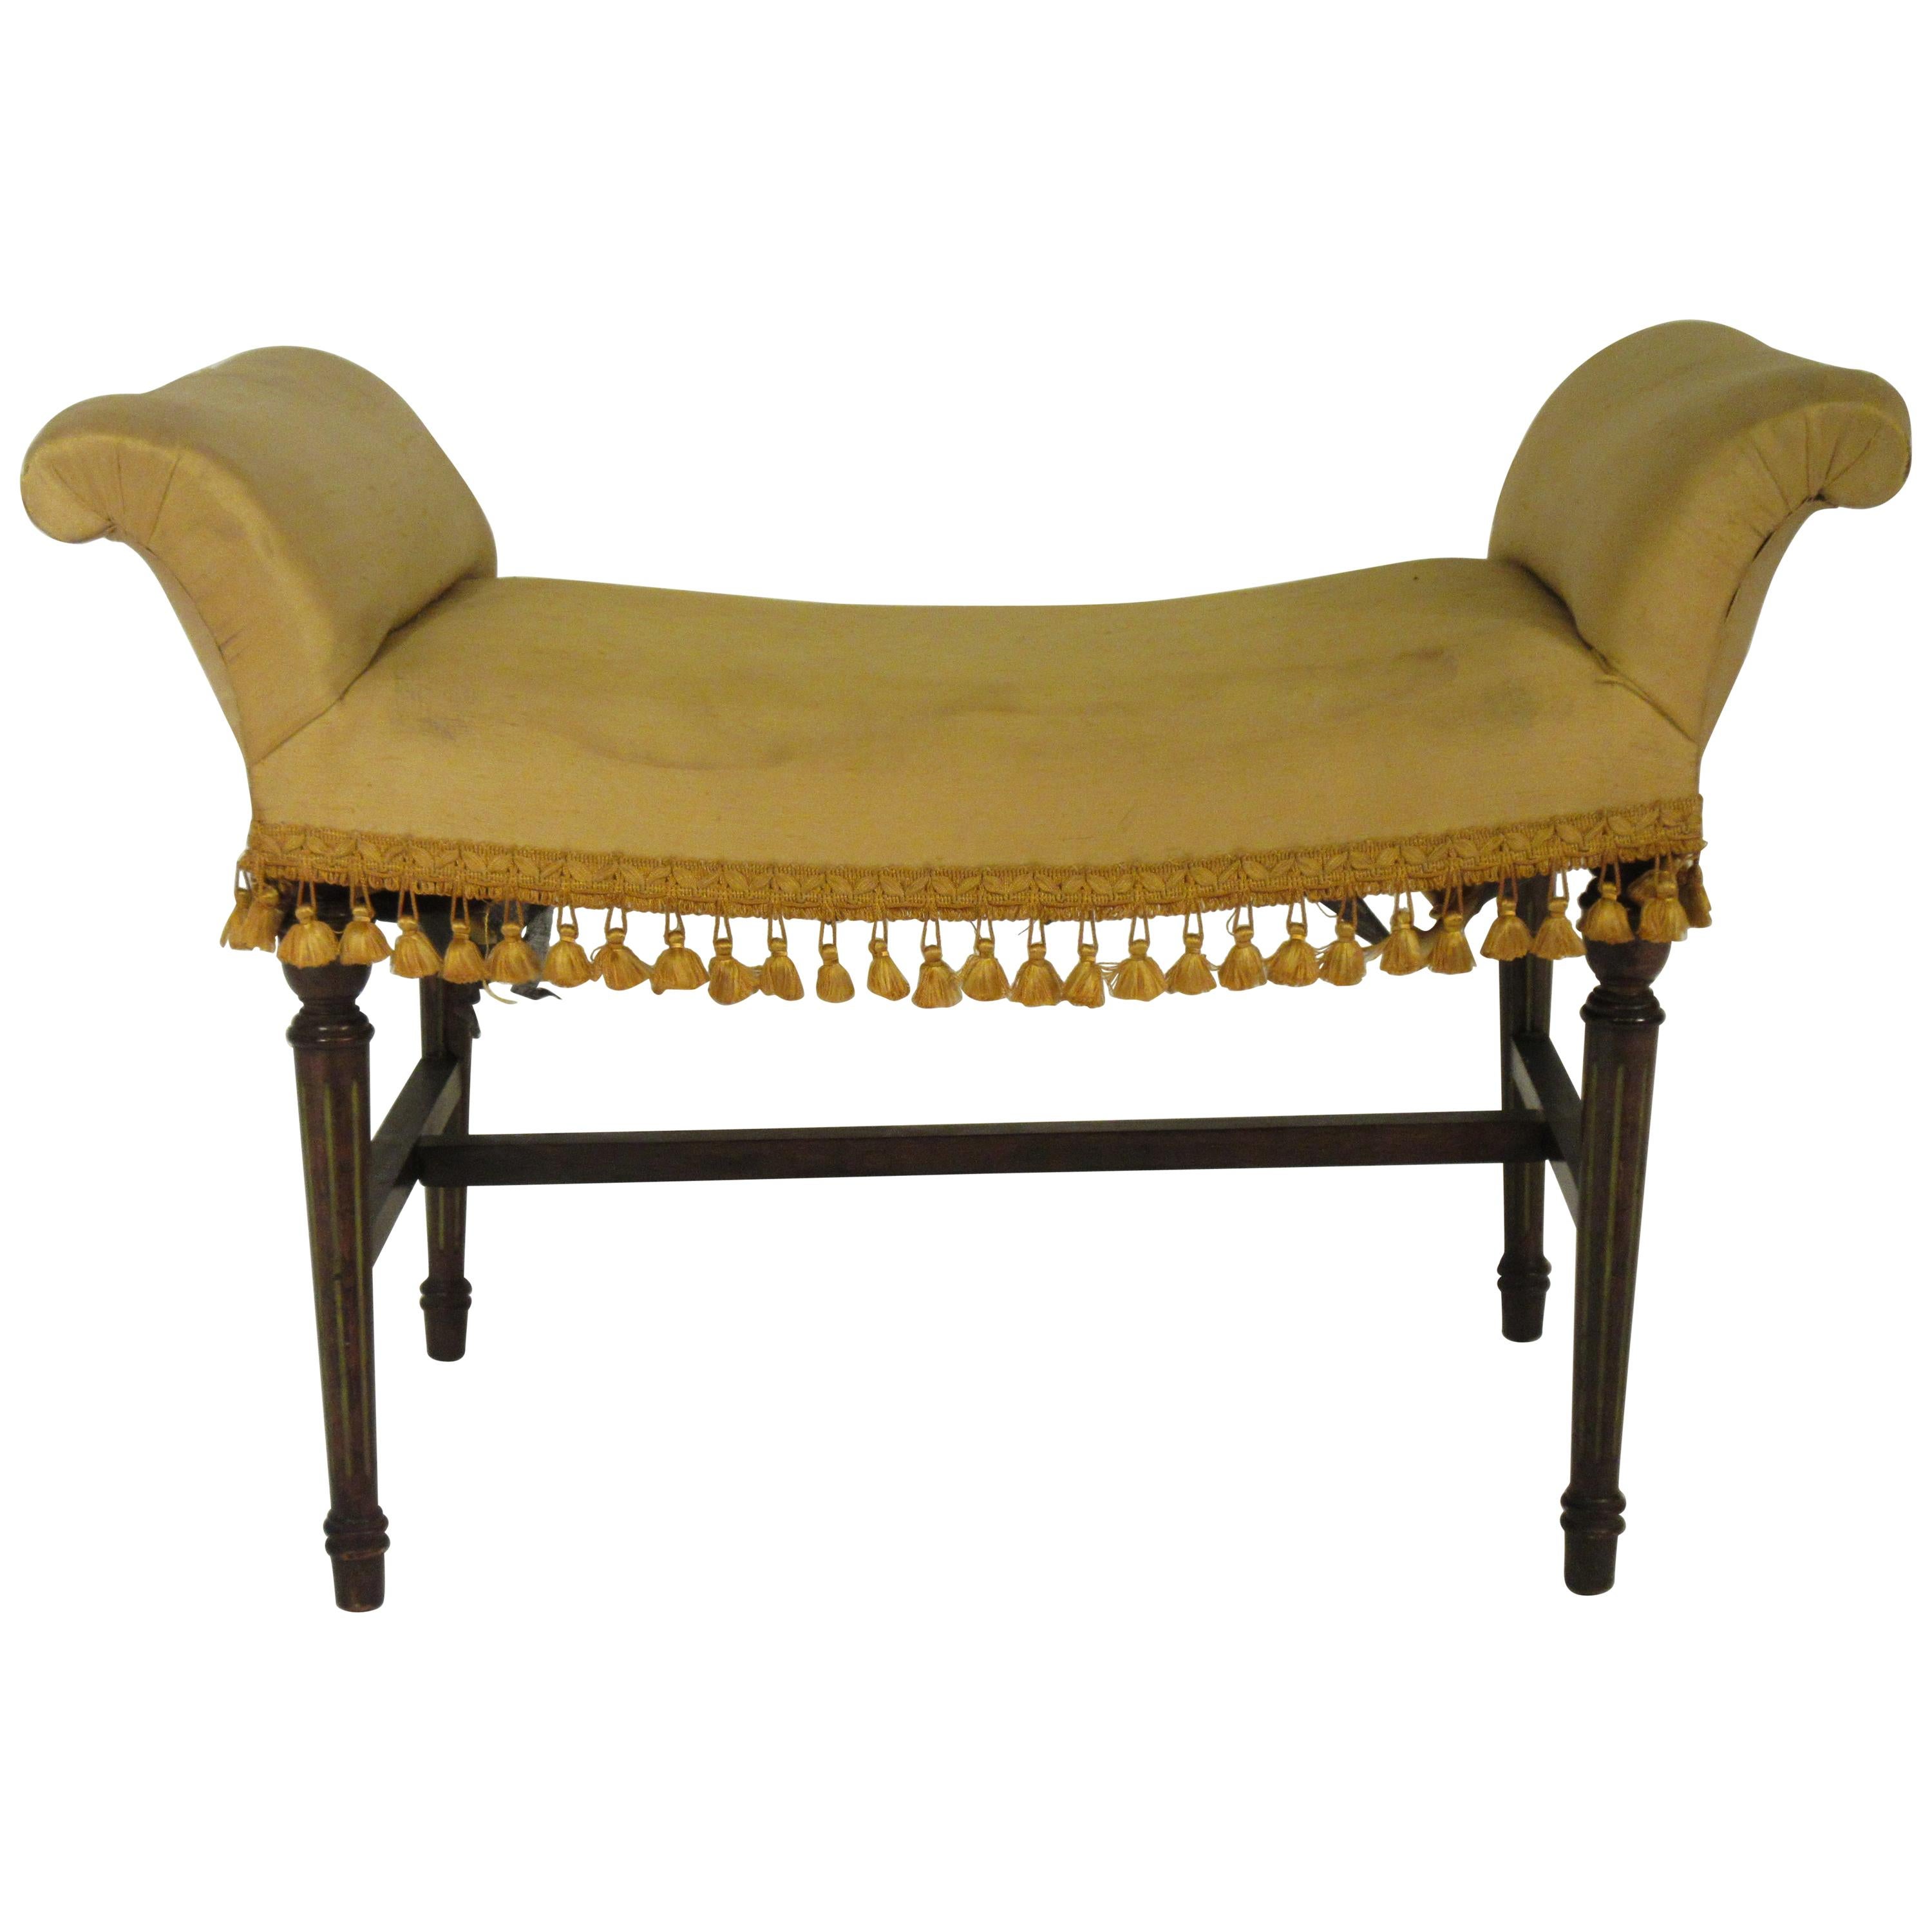 1920s Scrolled Arm Bench